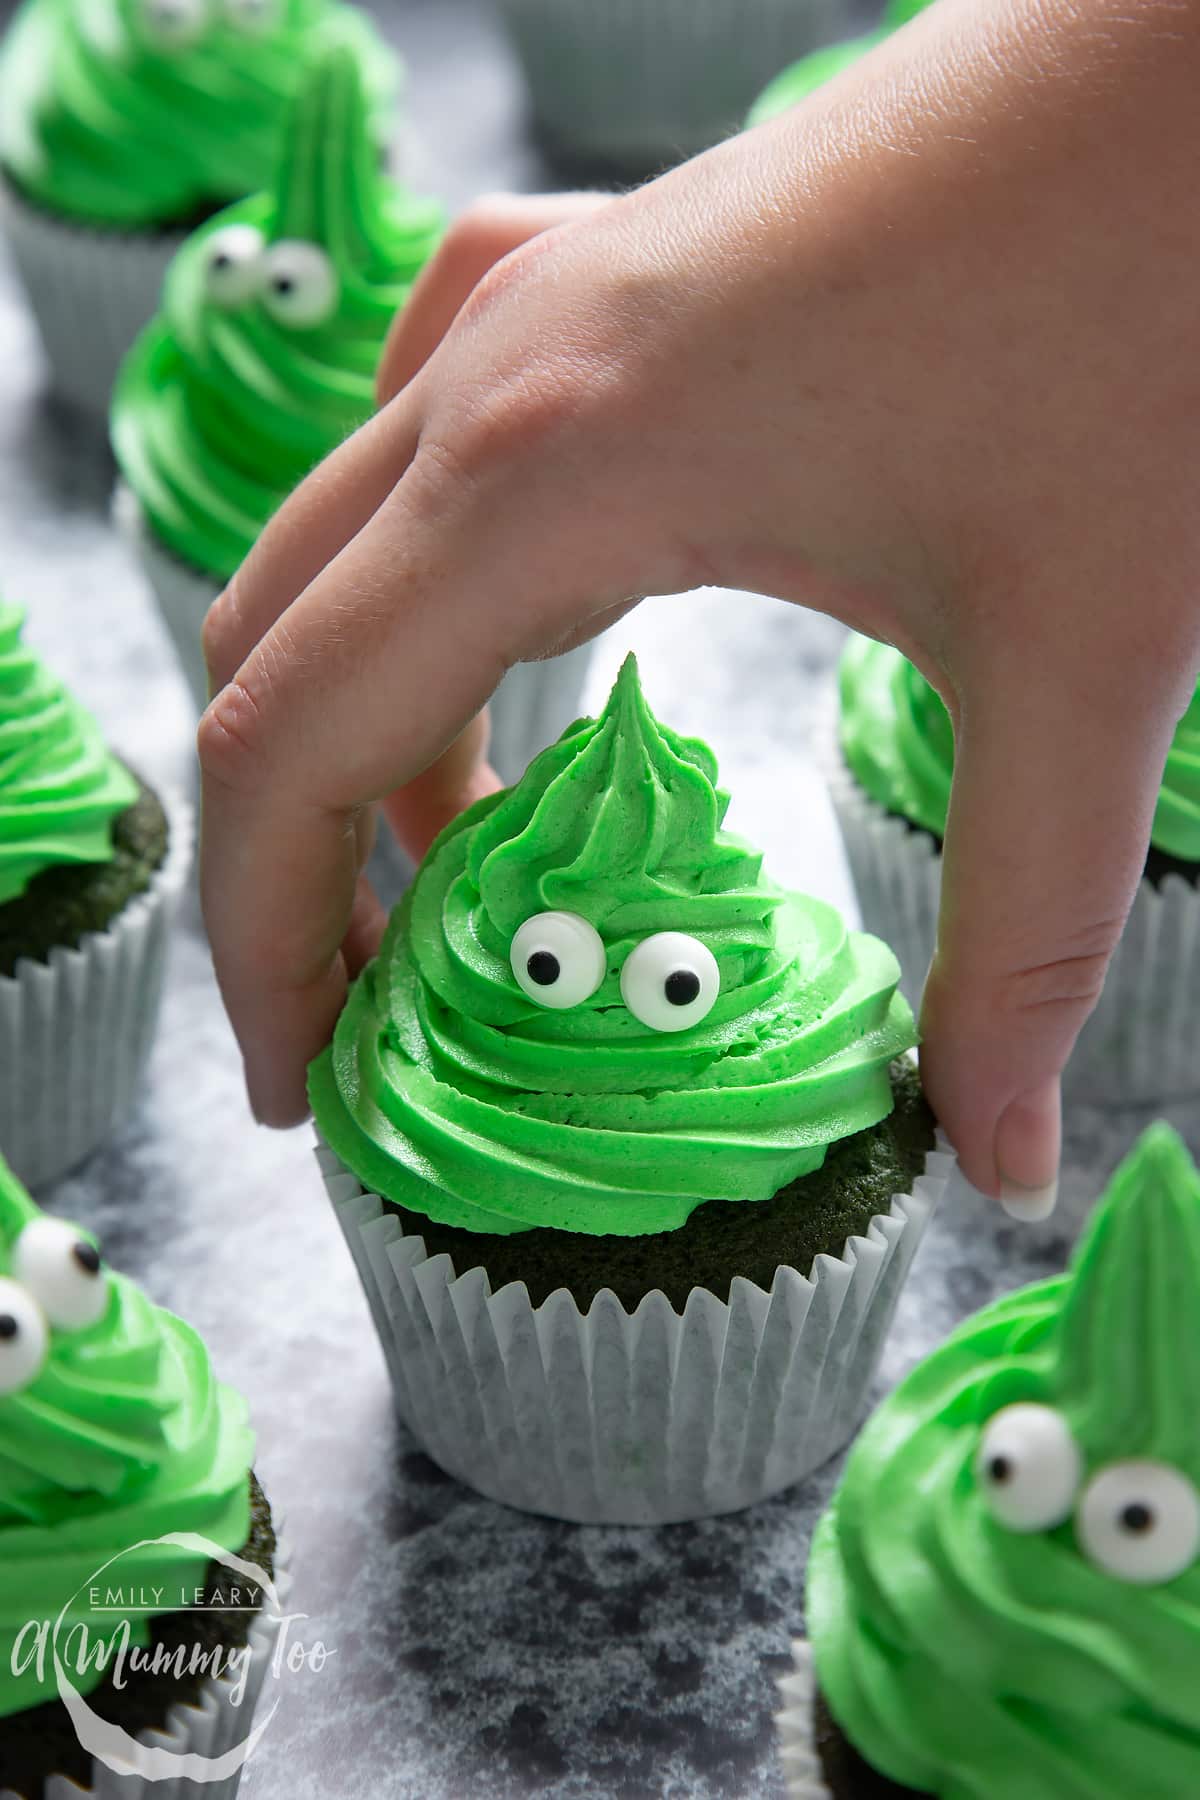 Green monster cakes made with dyed-green chocolate chip cupcakes topped with green peppermint frosting with added candy eyes. A hand reaches to take one.